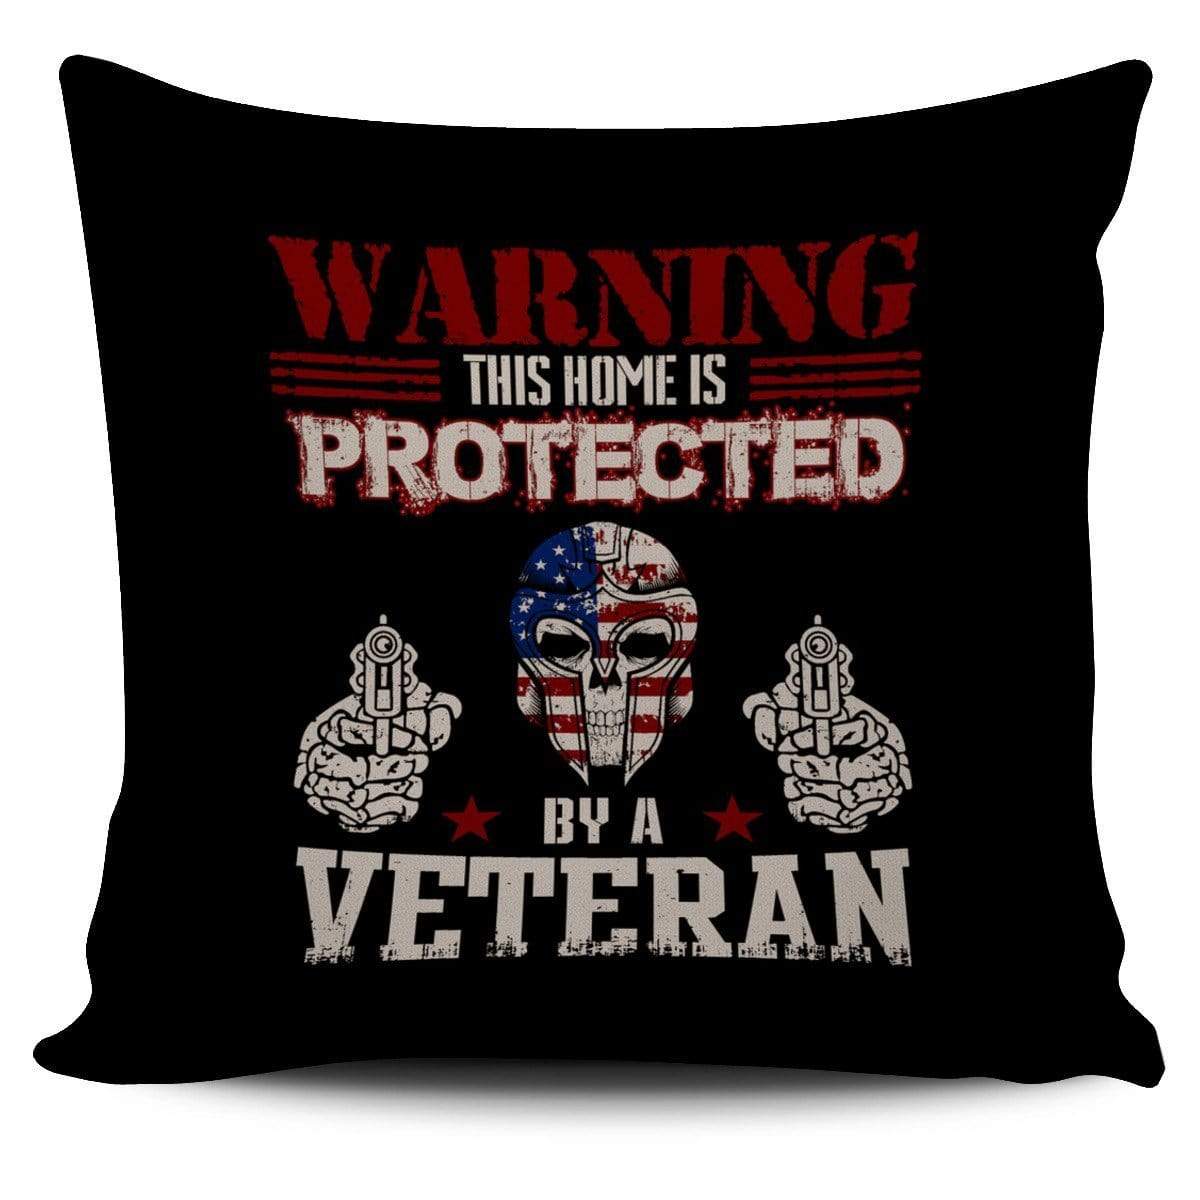 cushion cover Home Protected USA Veteran Pillow Cover